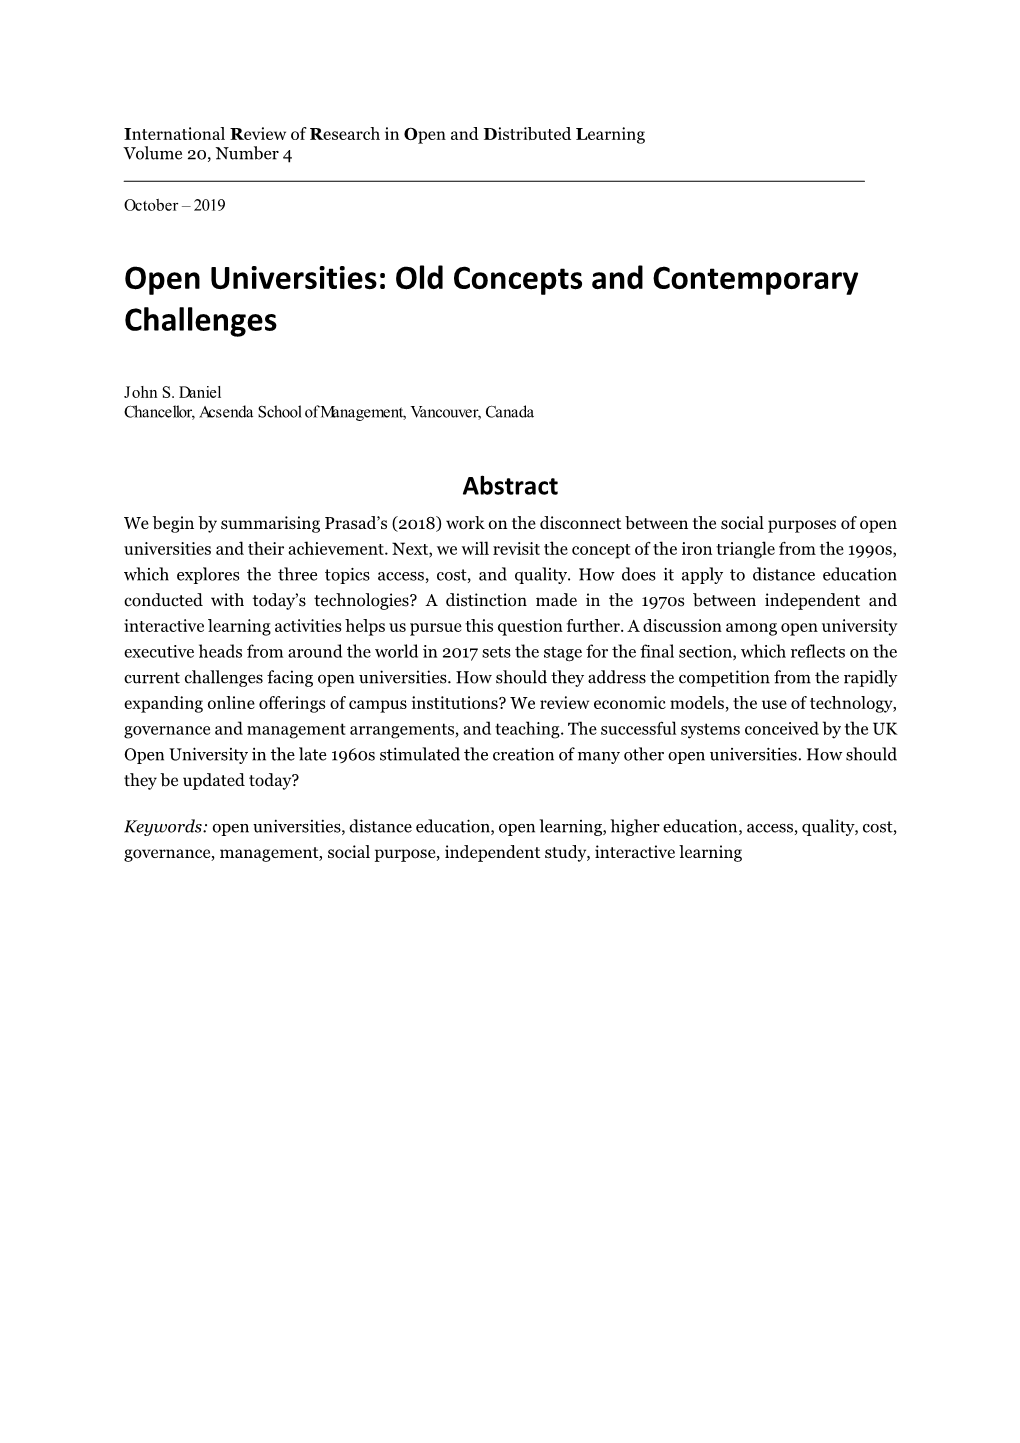 Open Universities: Old Concepts and Contemporary Challenges